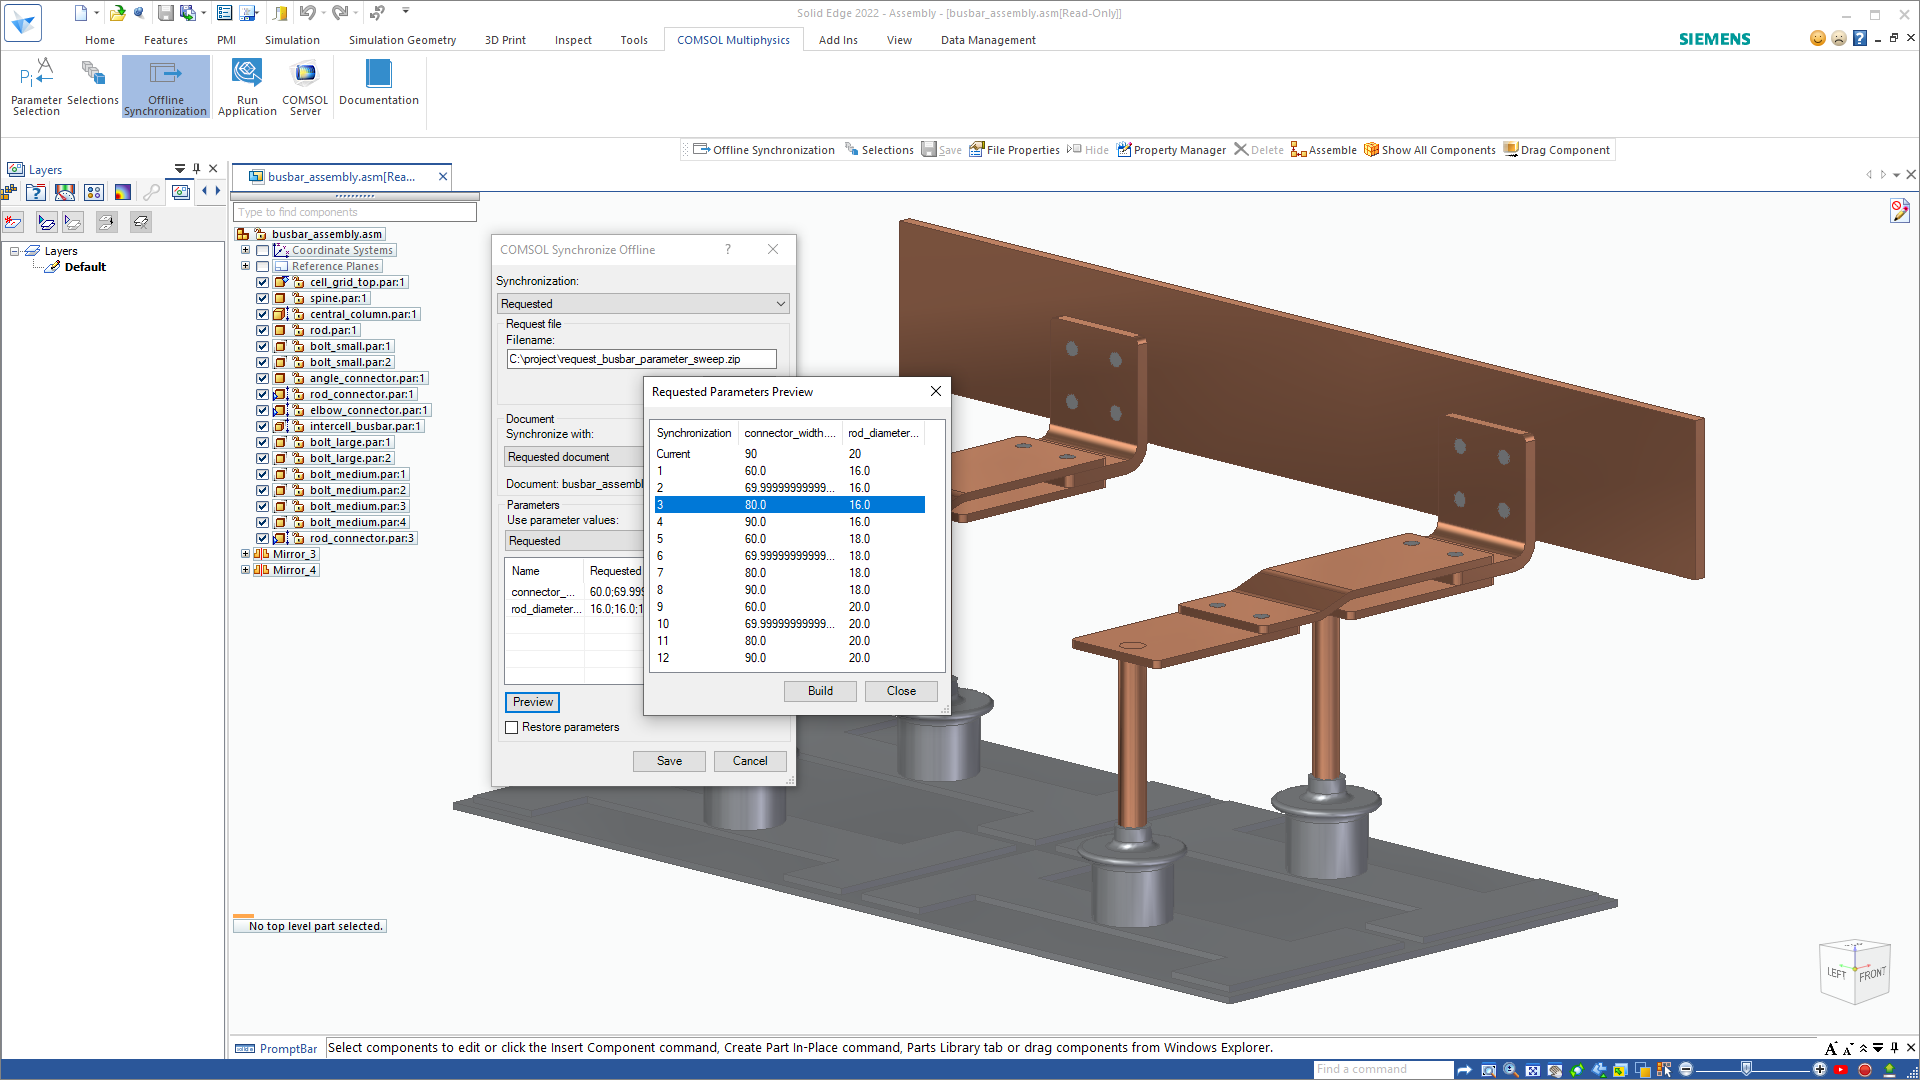 The Solid Edge UI with the COMSOL Synchronize Offline and Requested Parameters Preview windows opened.